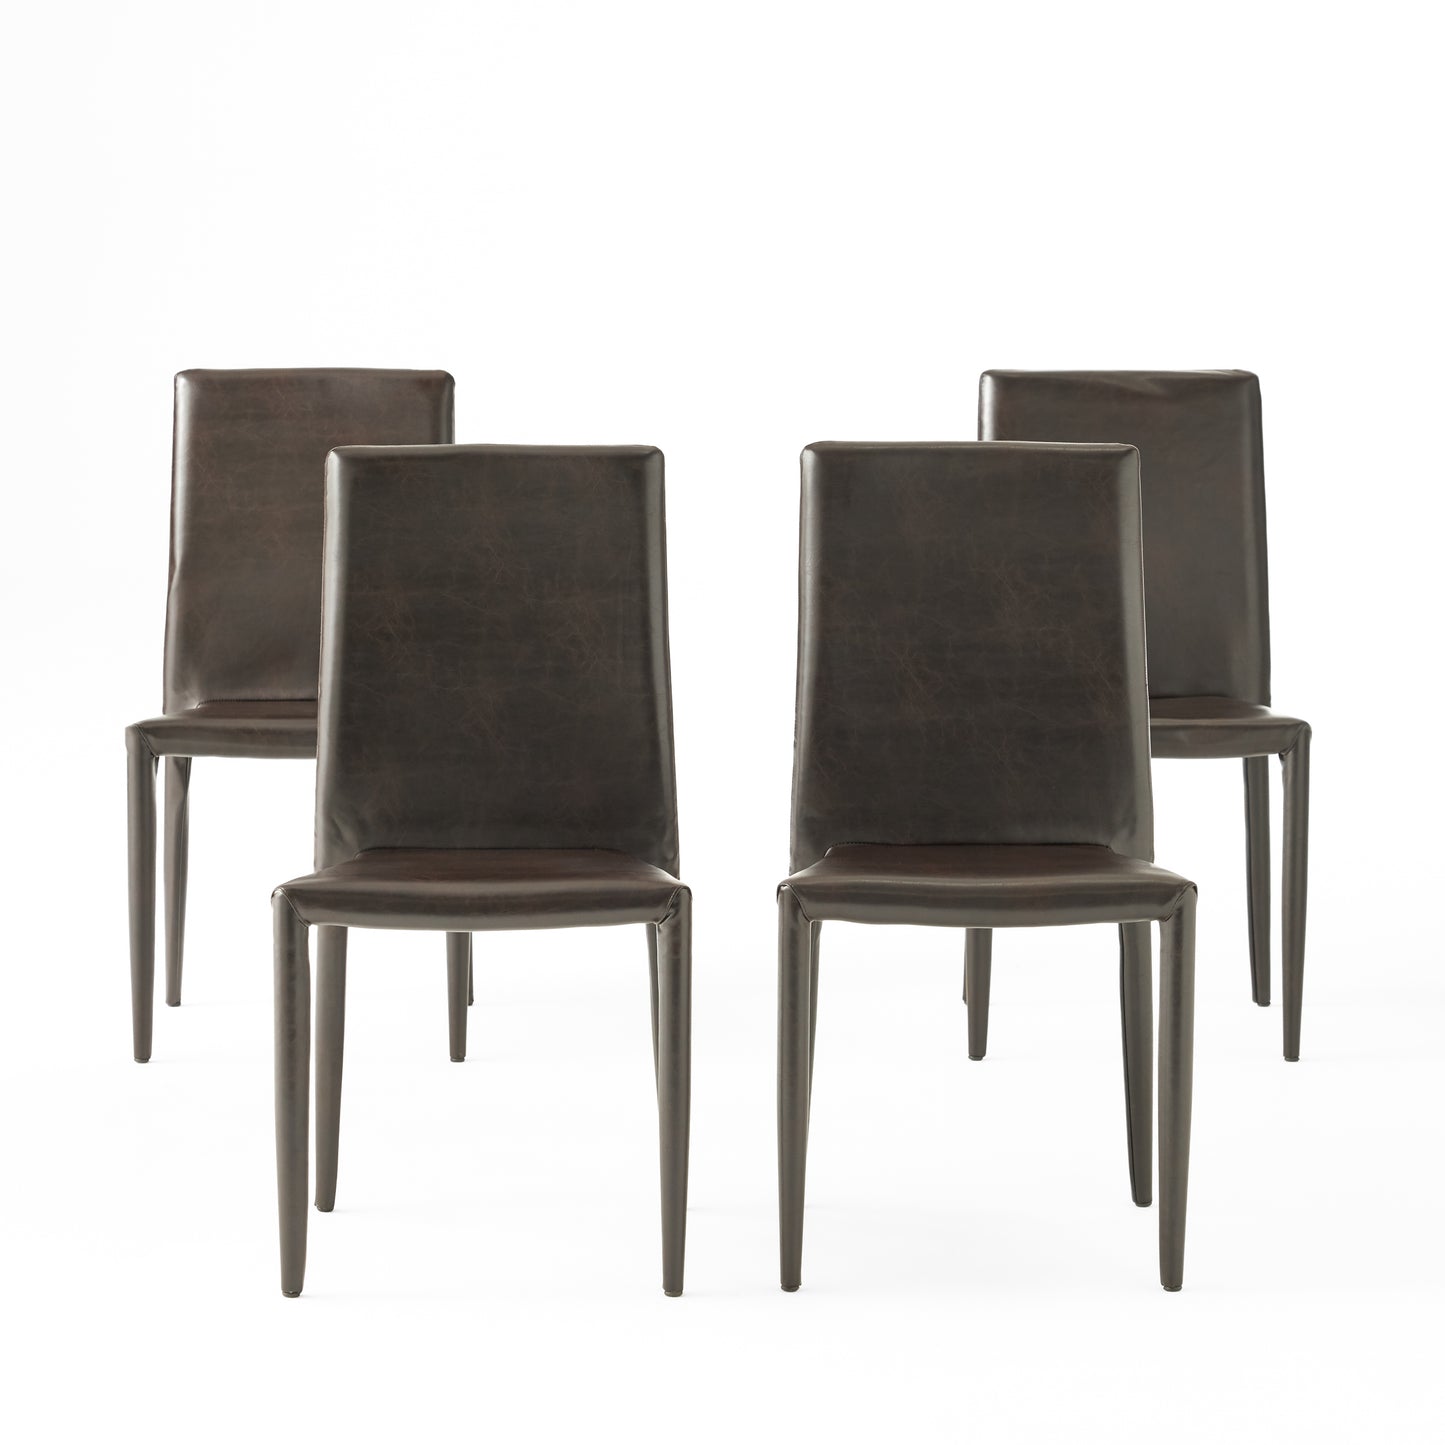 Pasiara Contemporary Brown Stacking Chairs (Set of 4)